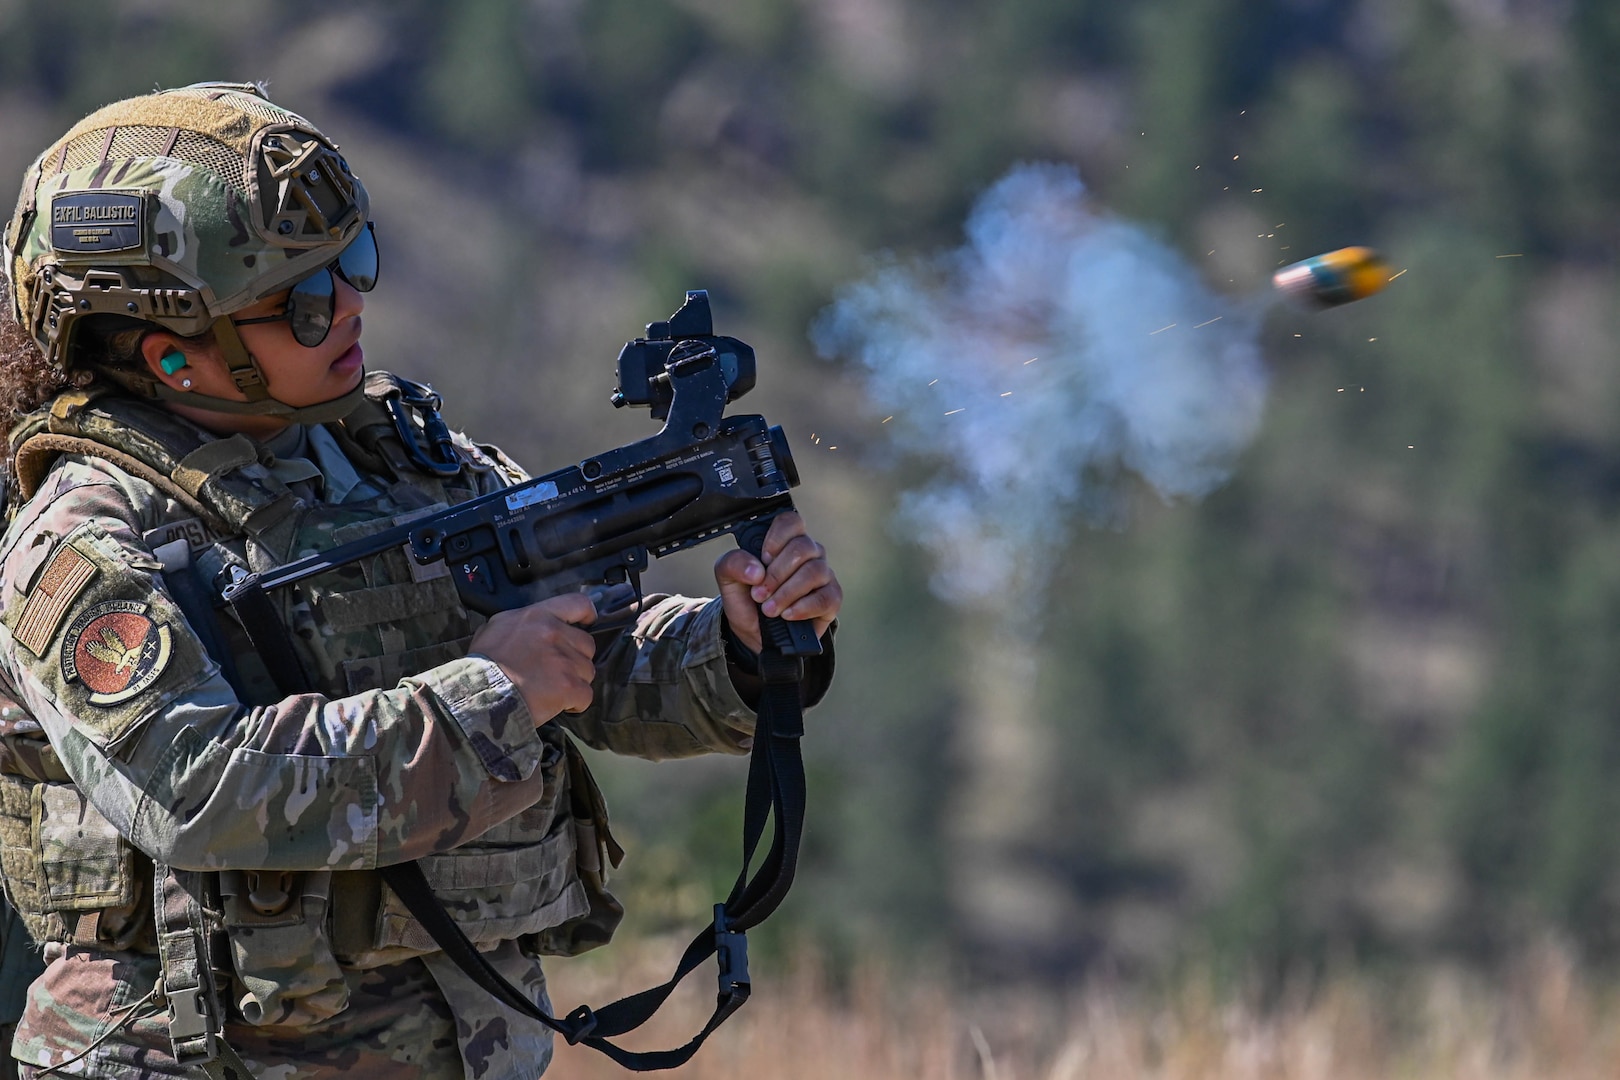 Airman 1st Class Jermalie Rosario, 91st Missile Security Forces Squadron defender, fires 40mm high explosive rounds from an M320 Grenade Launcher Module (GLM) during Operation Frontier Thunder at Camp Guernsey, Wyoming, Aug. 29, 2023. The M320 GLM allows defenders to engage armored and soft targets at a range of up to 400 meters. (U.S. Air Force photo by Airman 1st Class Kyle Wilson)